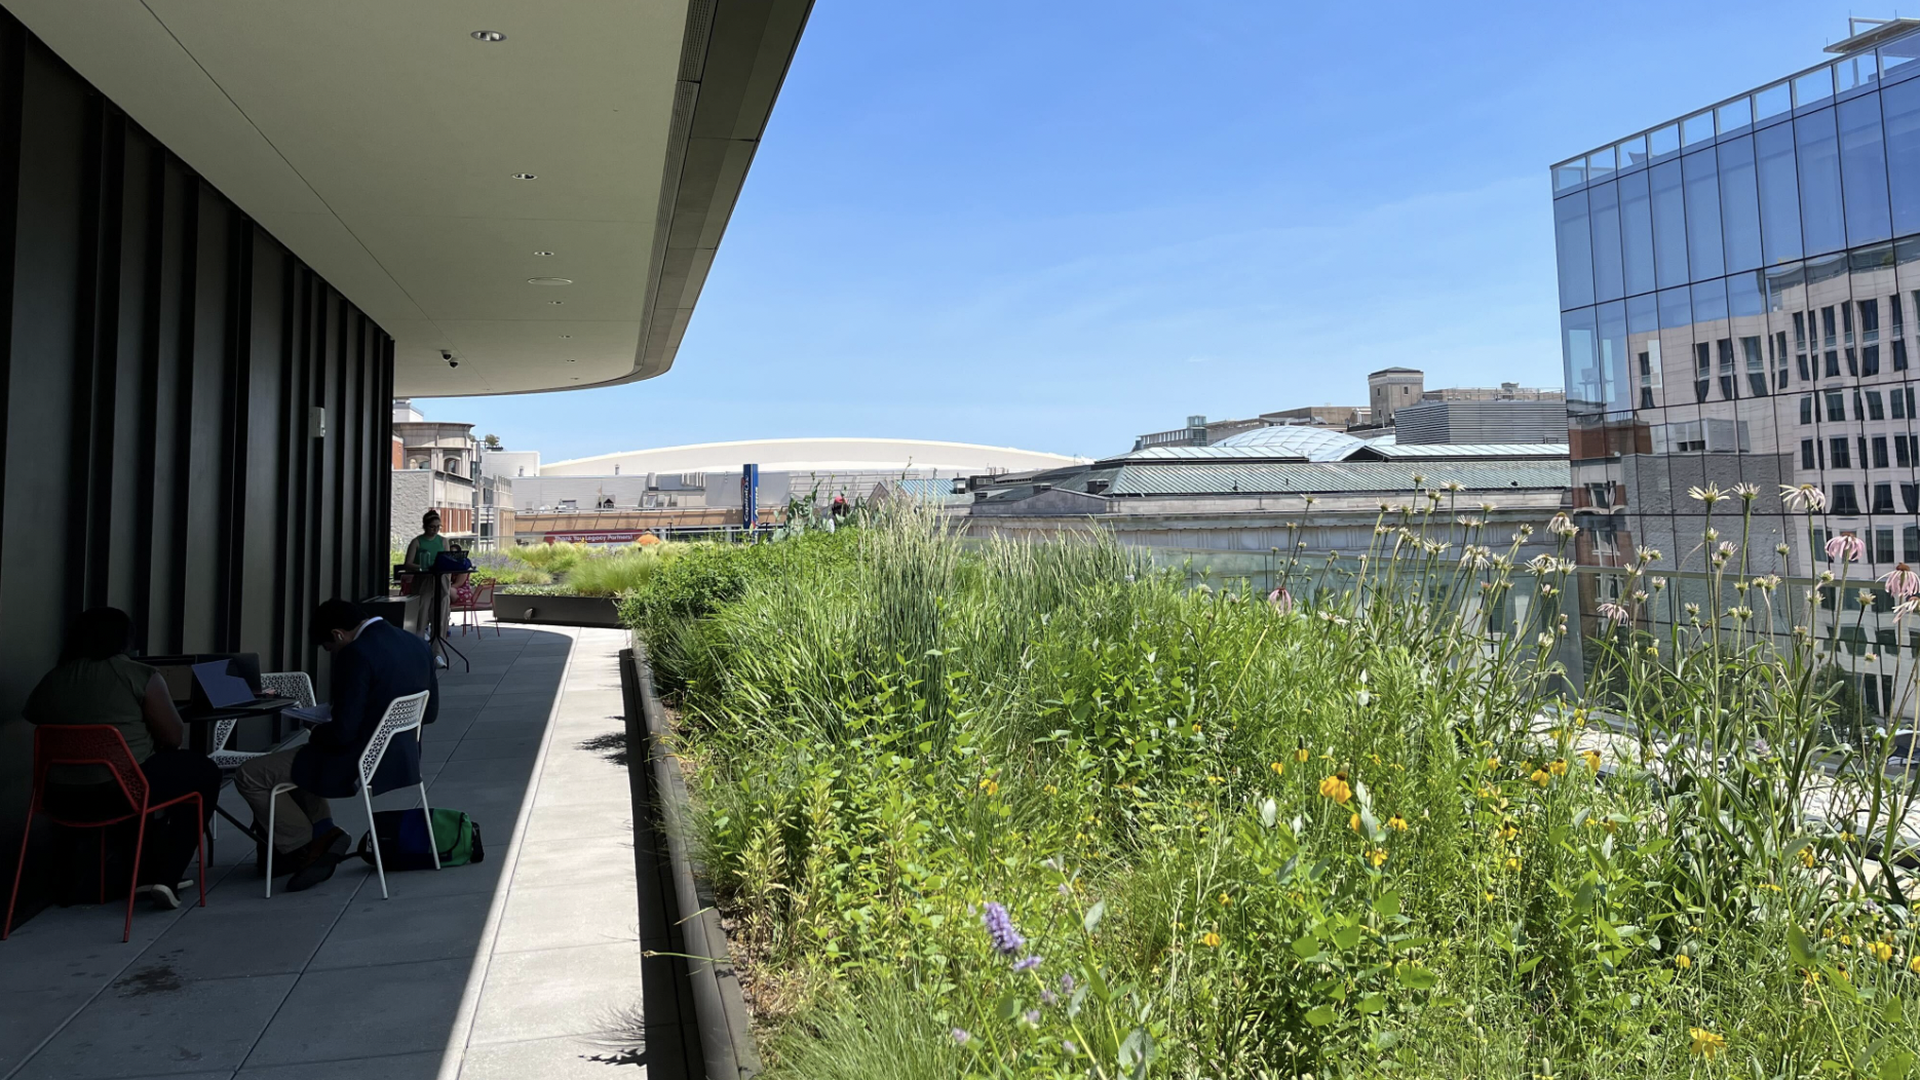 A rooftop with a garden full of grass